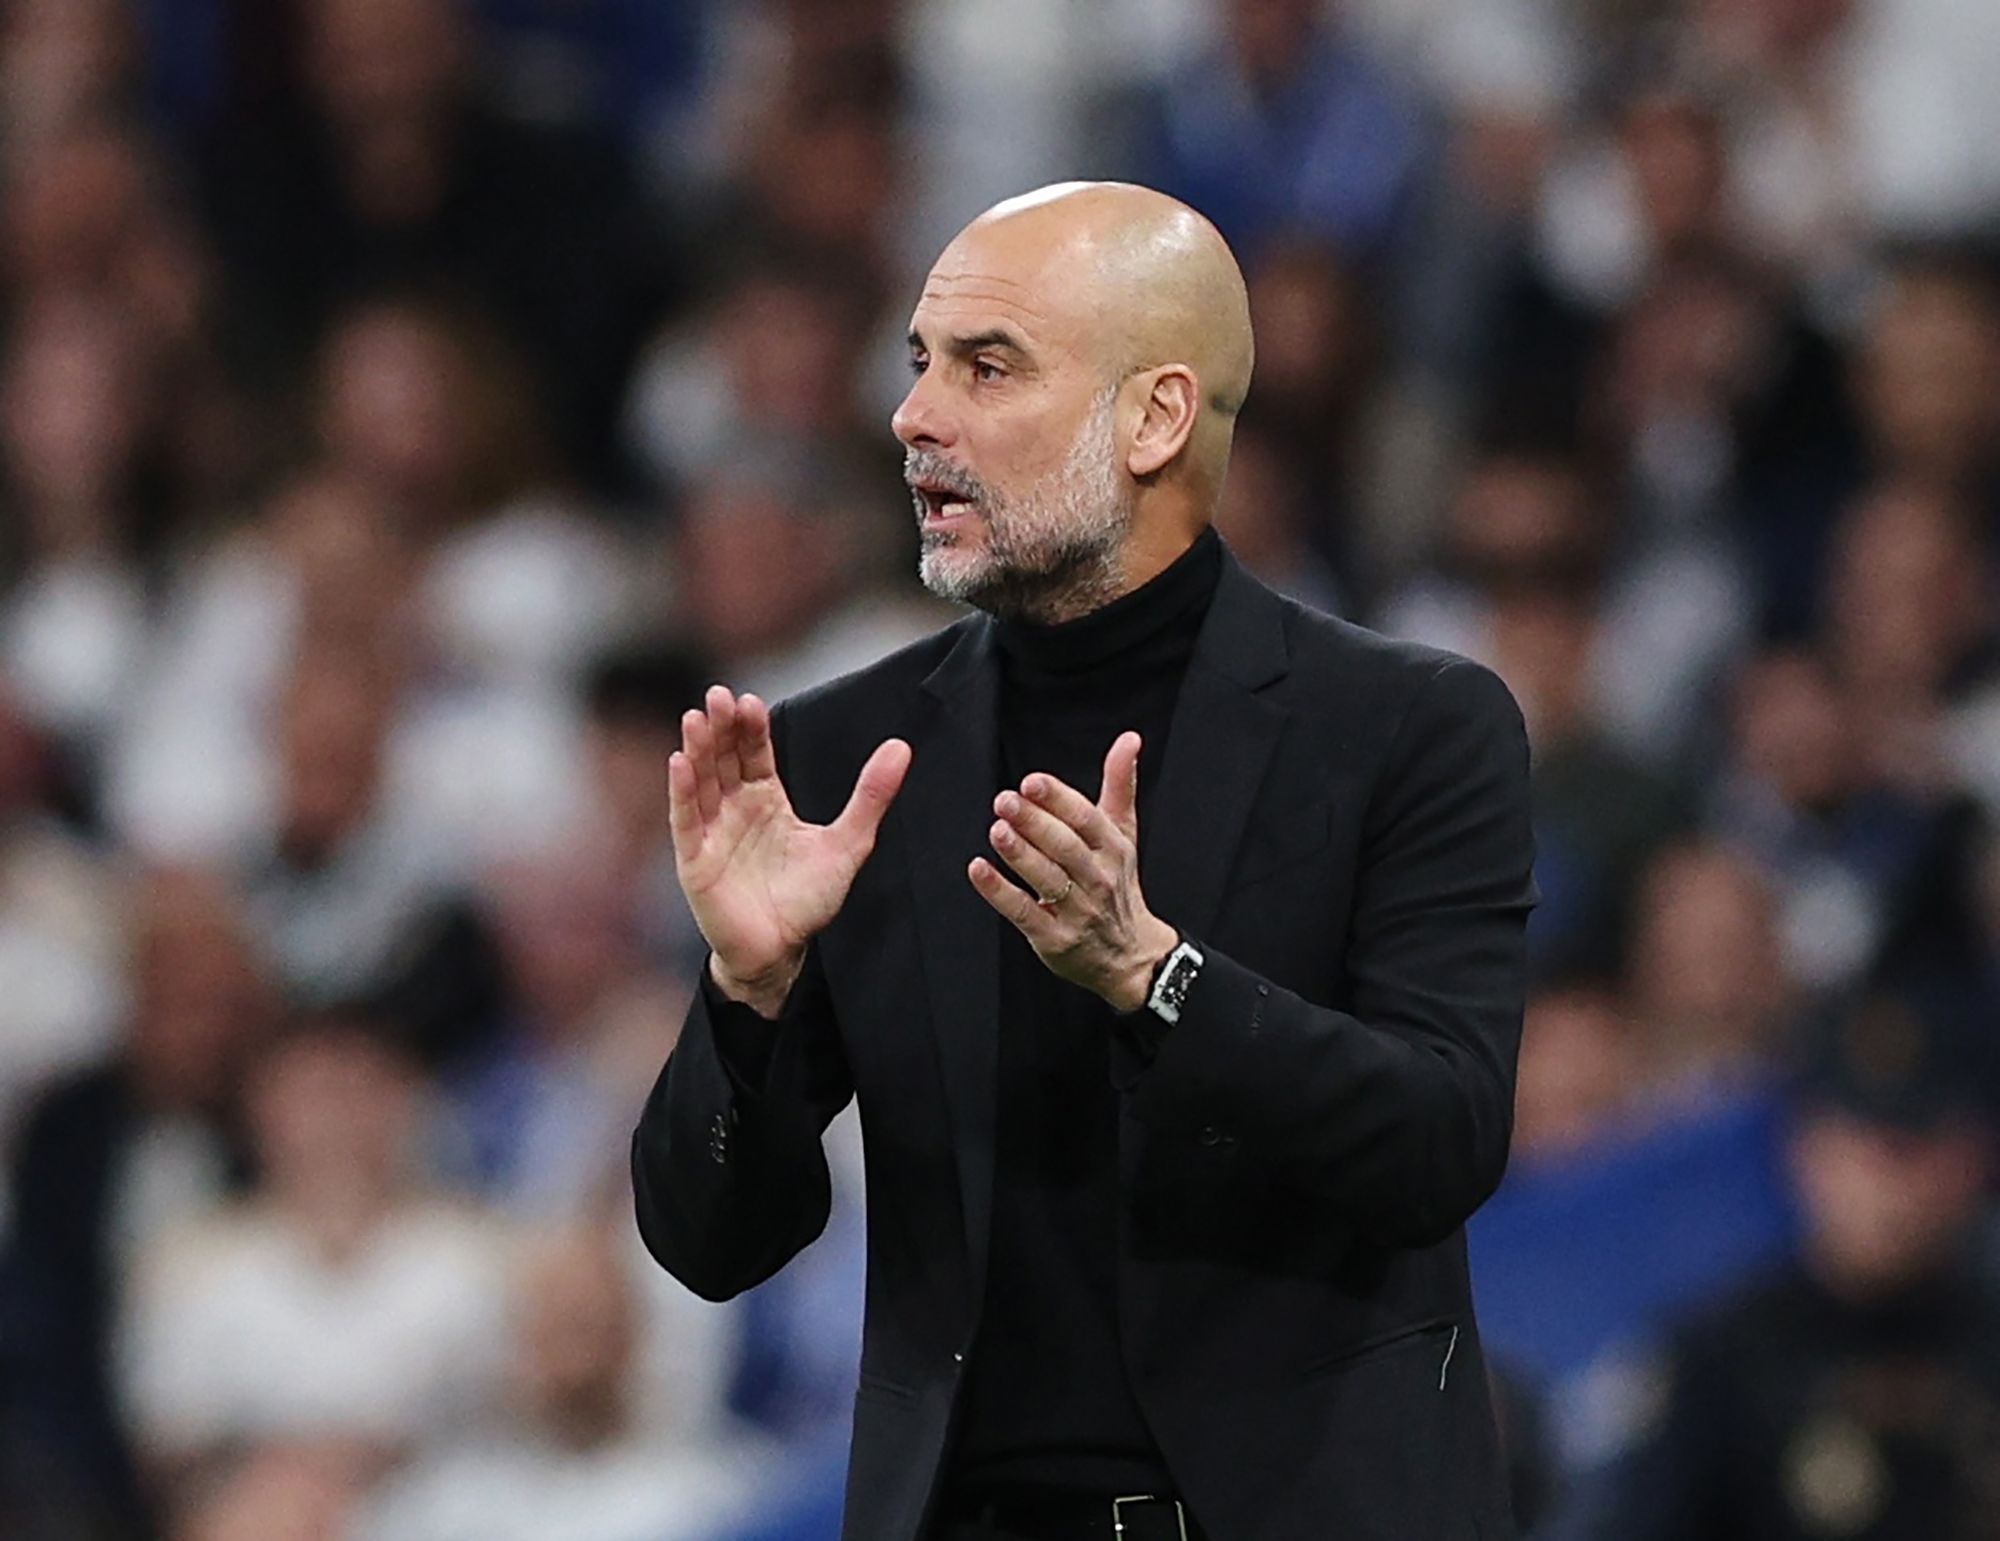 Pep Guardiola's watch is one of just 50 models made.